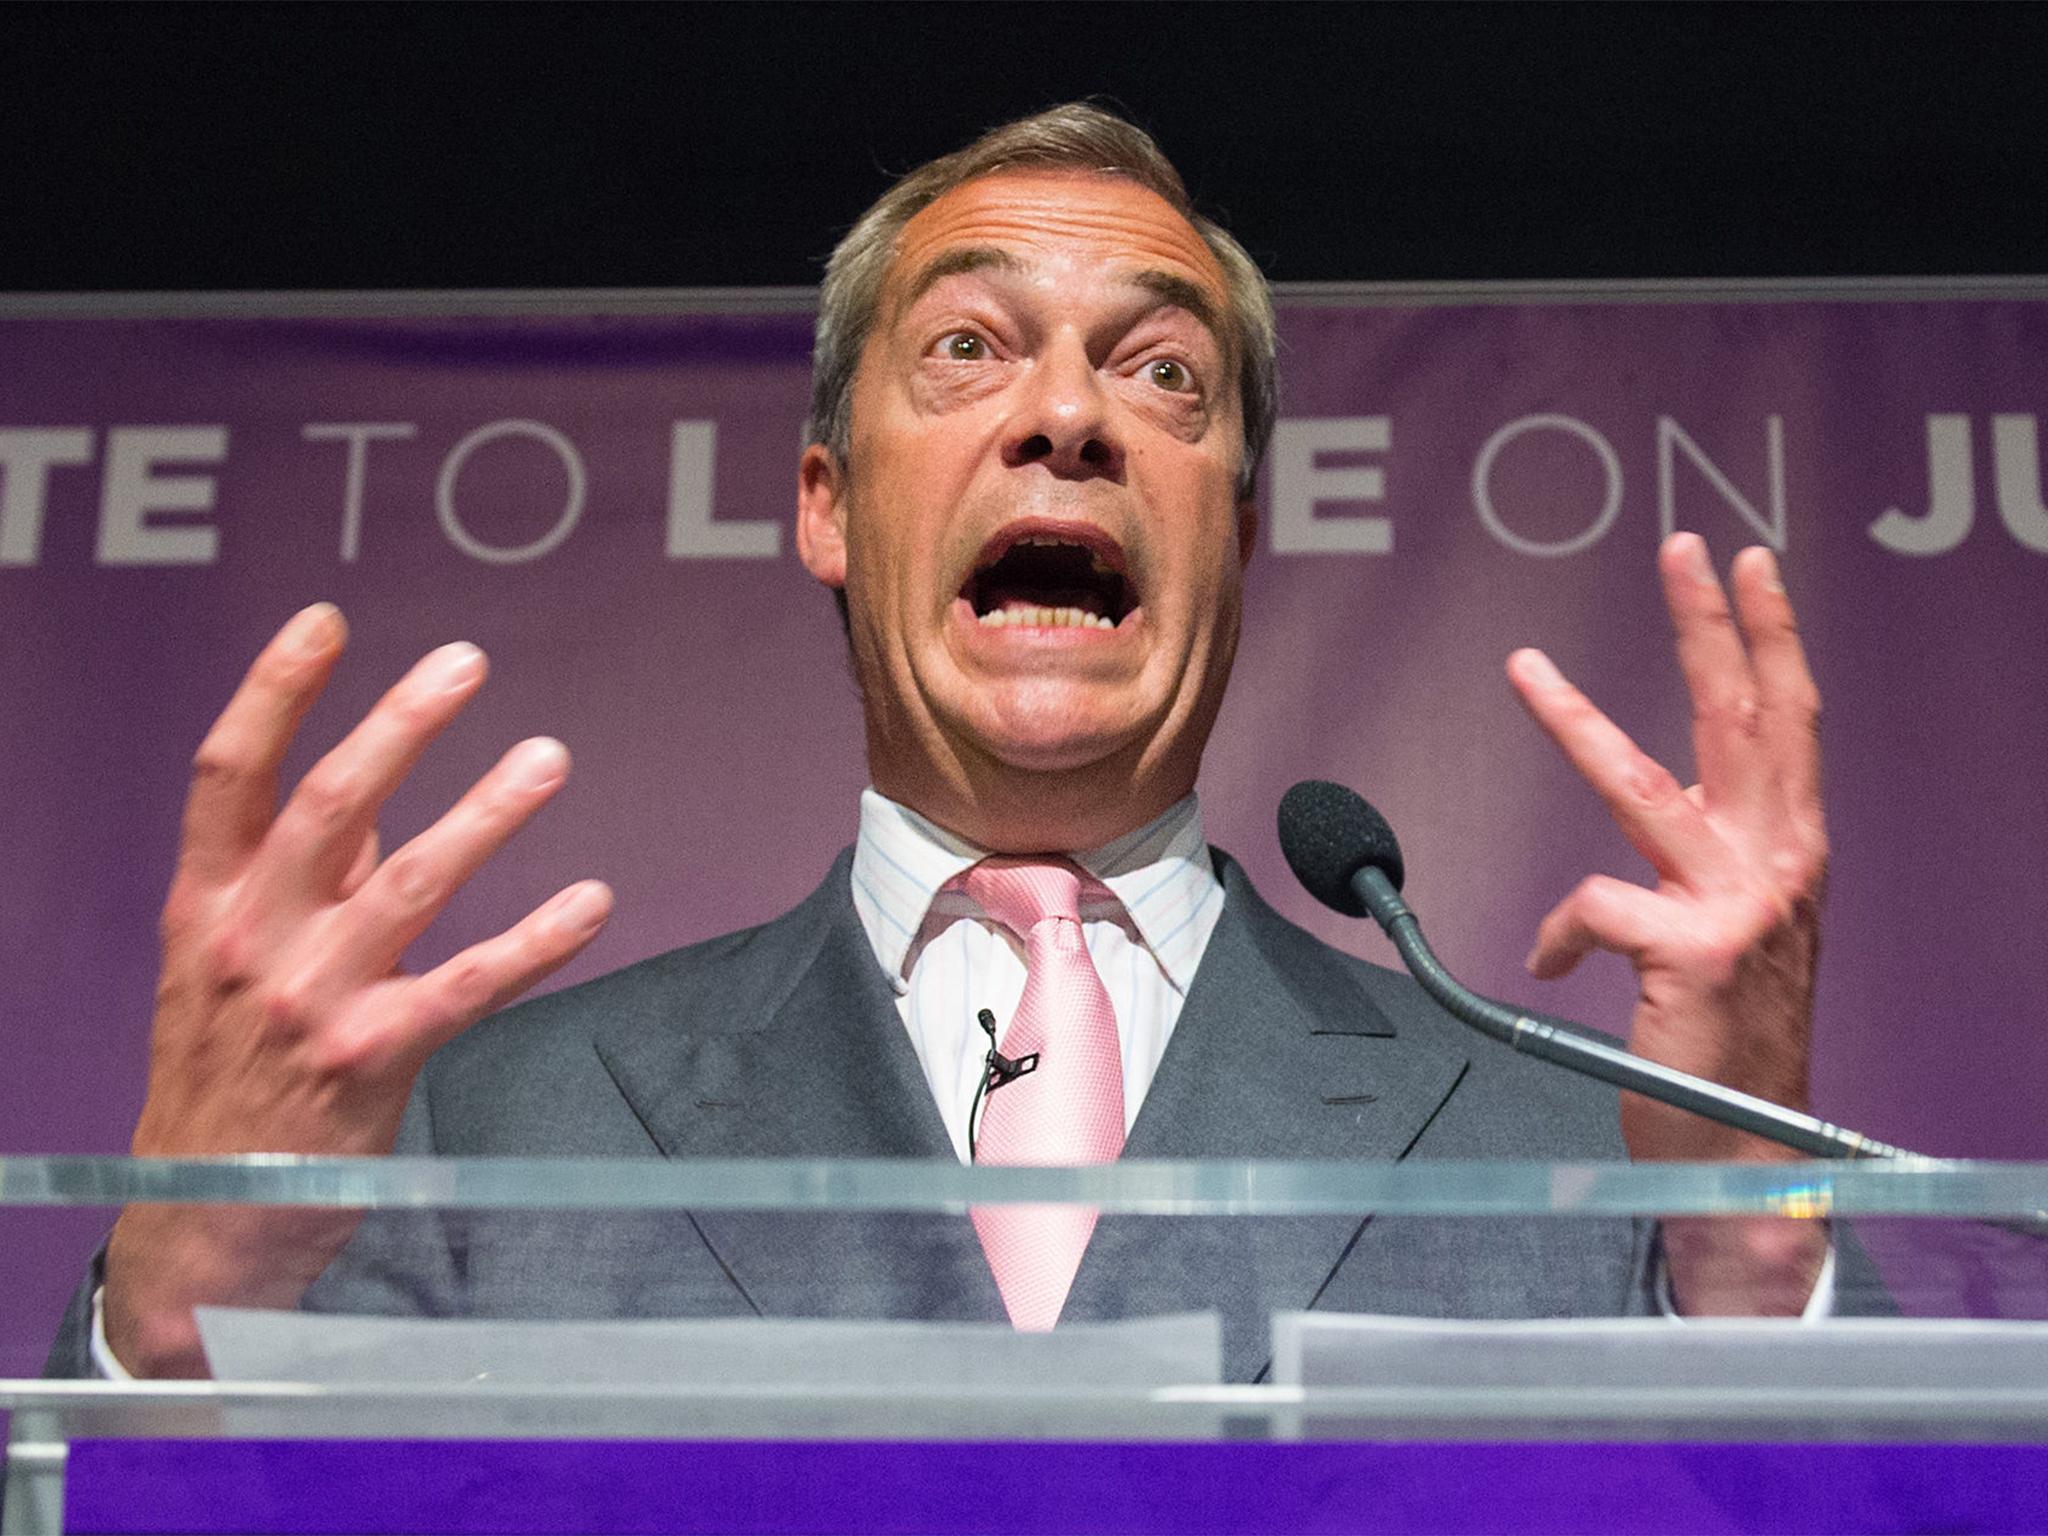 Nigel Farage had to miss the final debate due to unspecified 'family reasons'